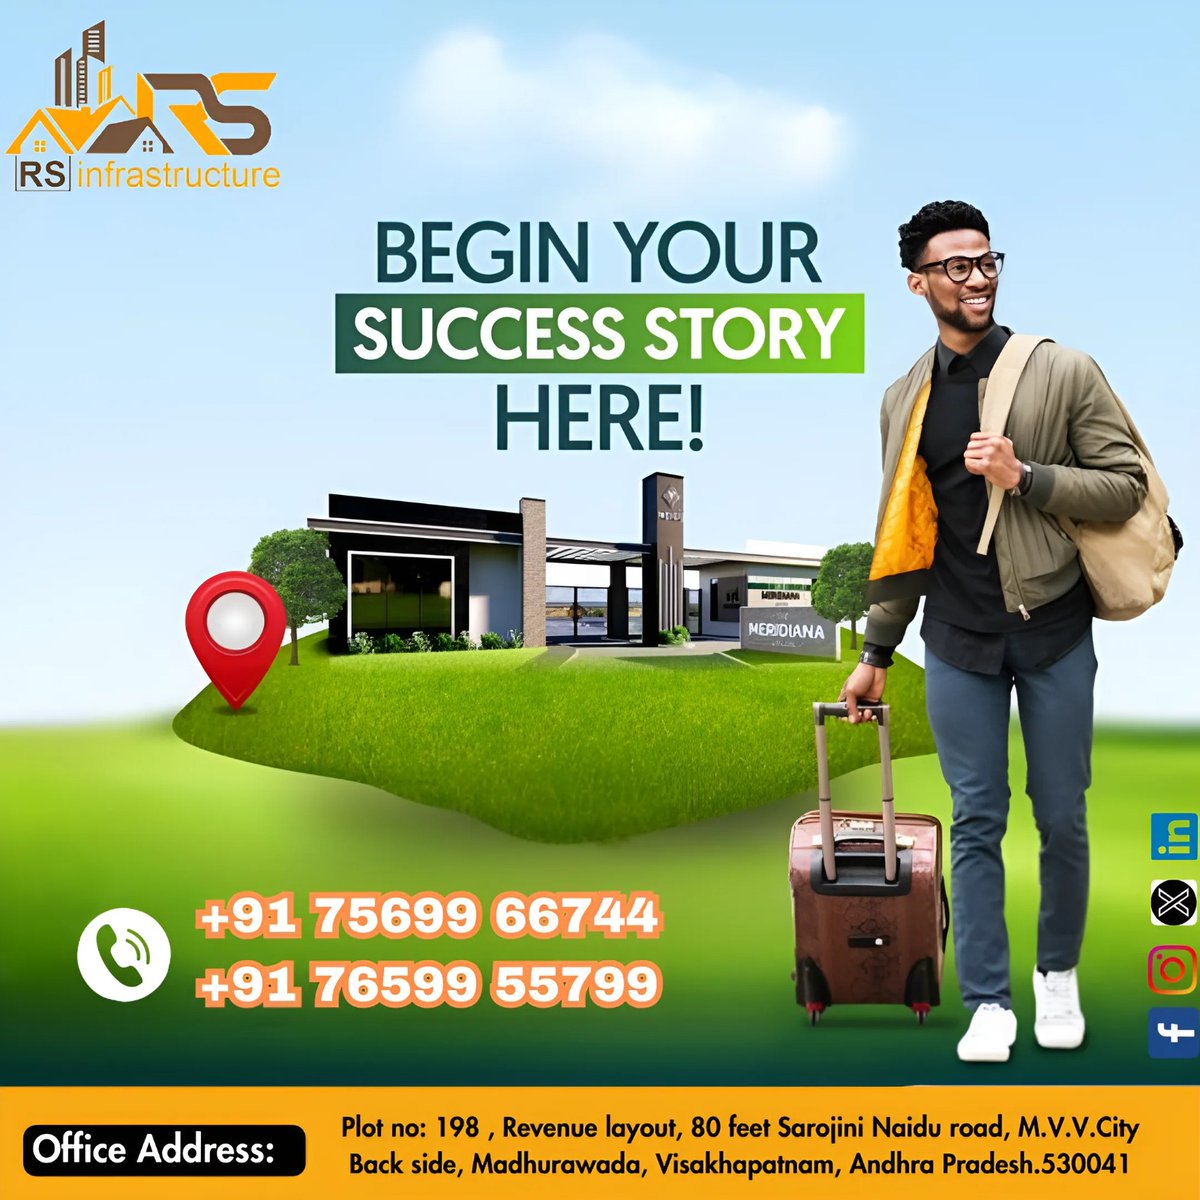 R S Infrastructure: Where Vision Meets Foundation. Begin Your Success Story Here and Build a Legacy of Excellence.

Contact Us: +91 75699 66744 & +91 76599 55799

#RSInfrastructure #InvestInLand #LandOwnership #WealthBuilding #PropertyInvestment  #SecureFuture #GrowthPotential